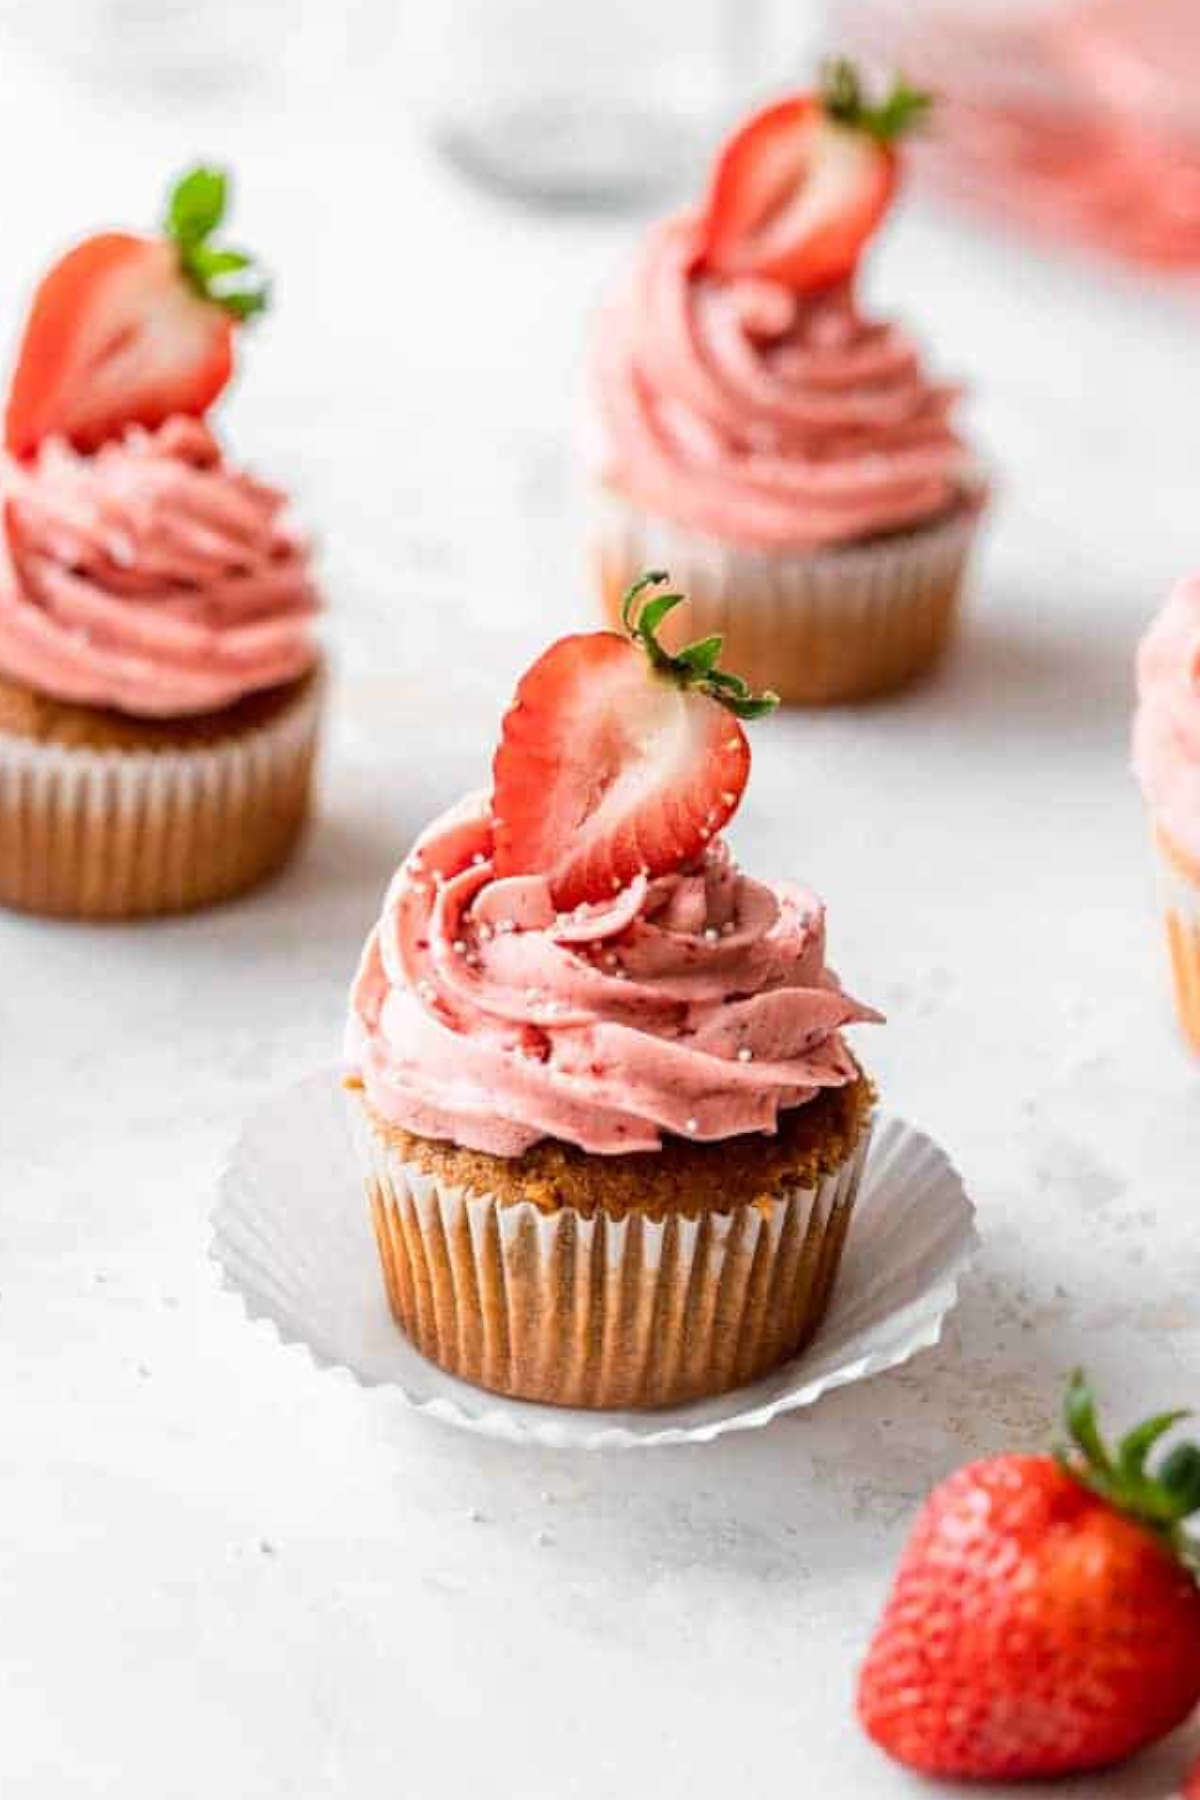 Close up image of strawberry cupcakes in cupcake cases on a benchtop.